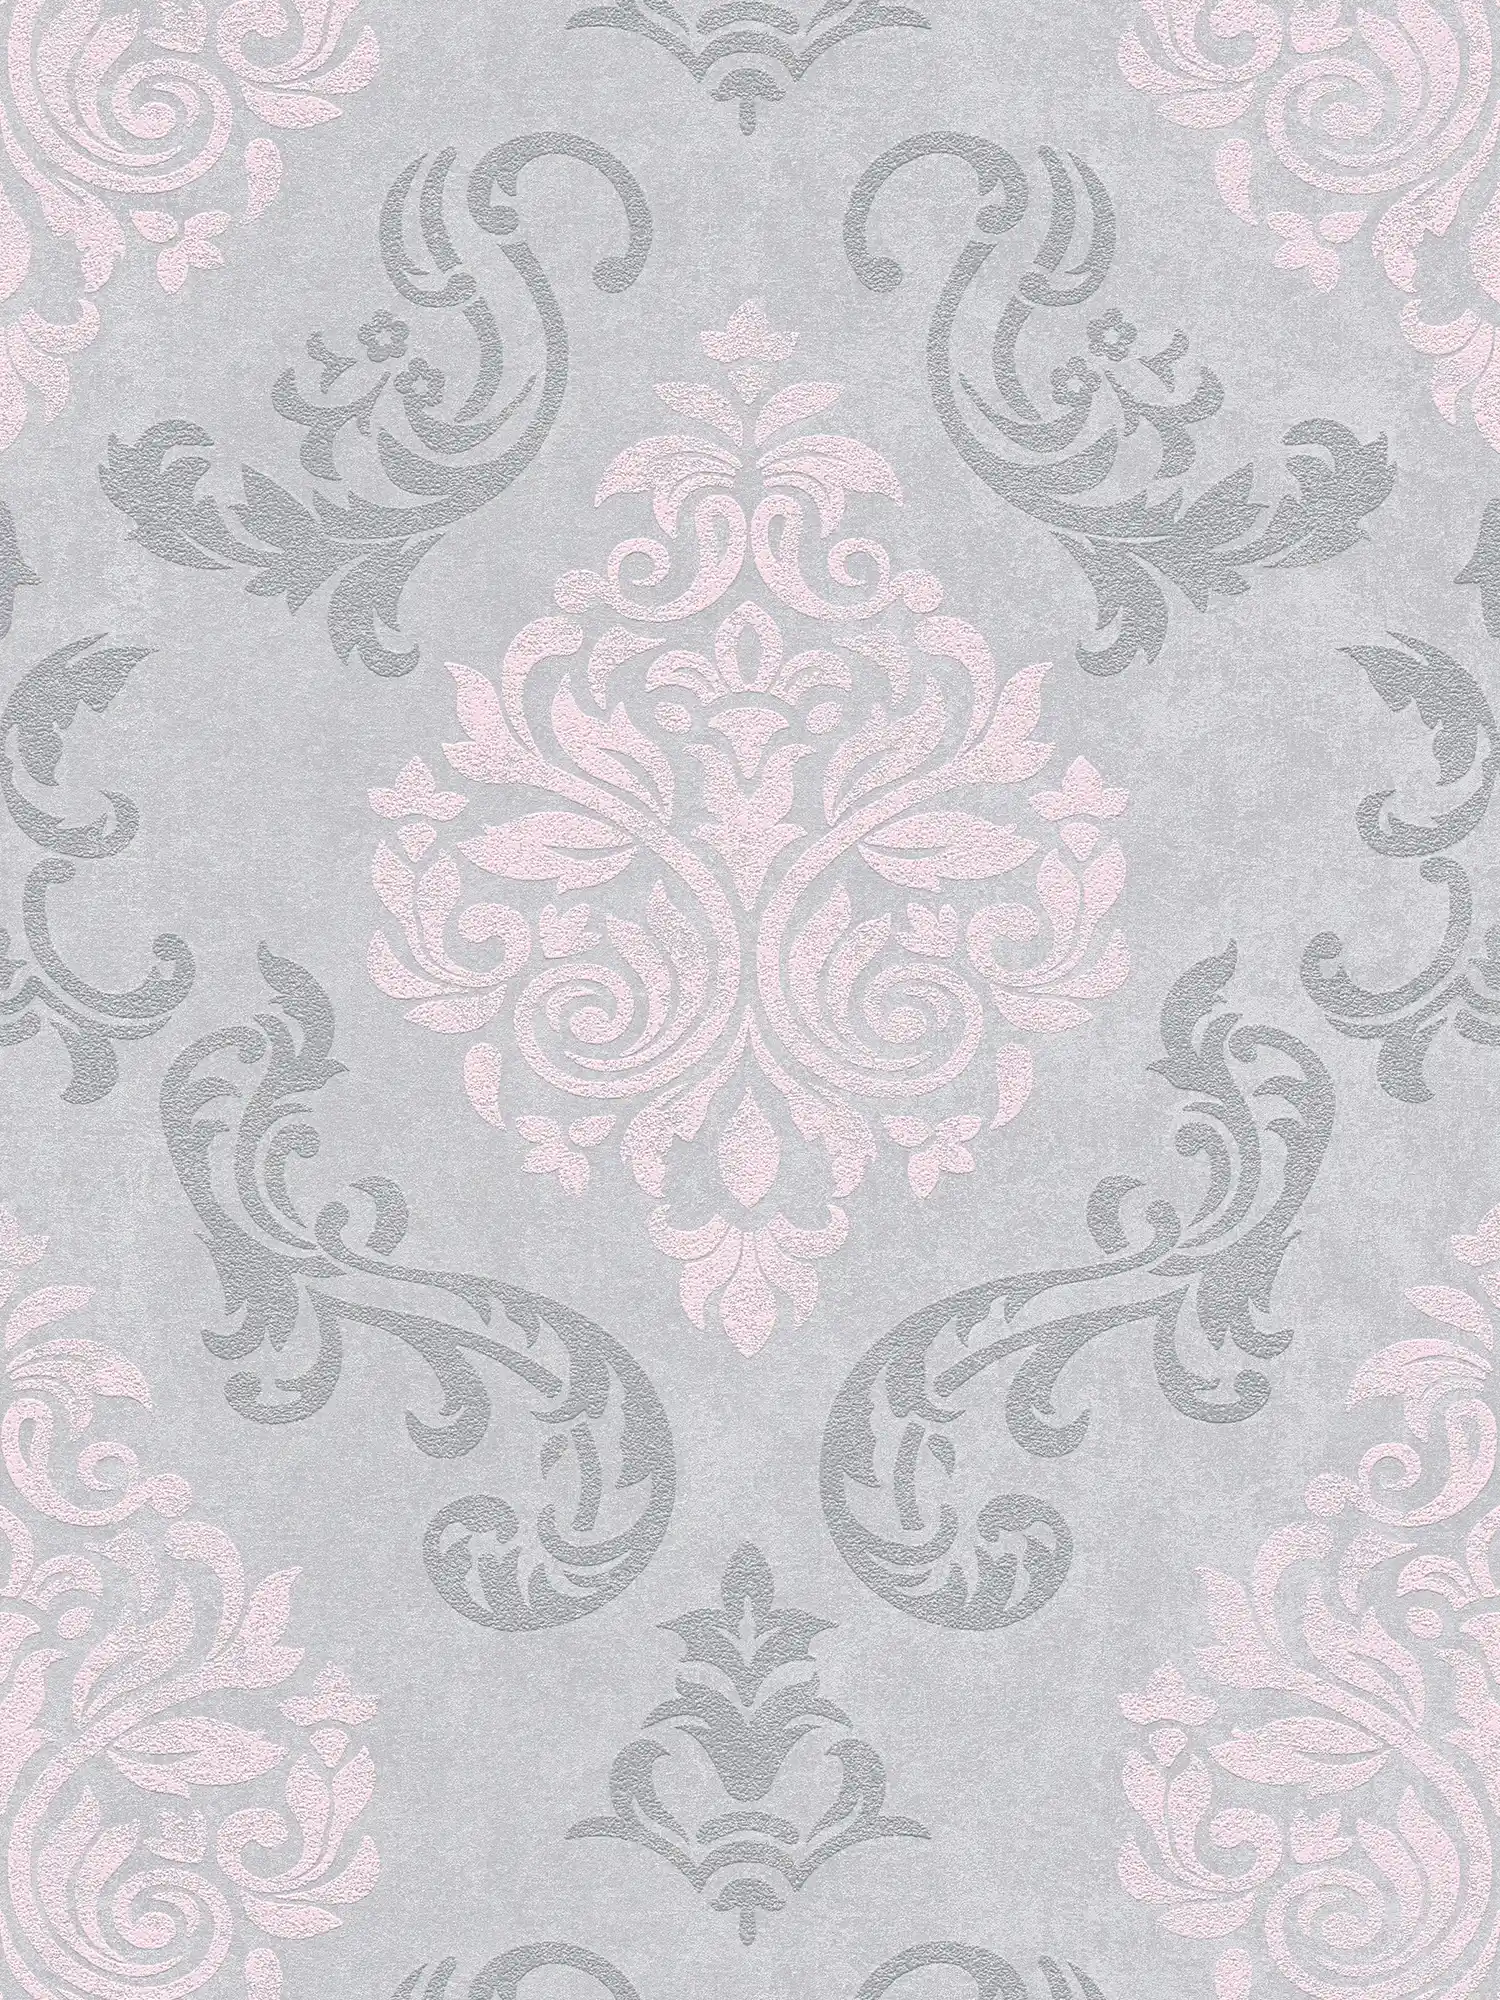         Ornaments wallpaper baroque style with glitter effect - grey, metallic, pink
    